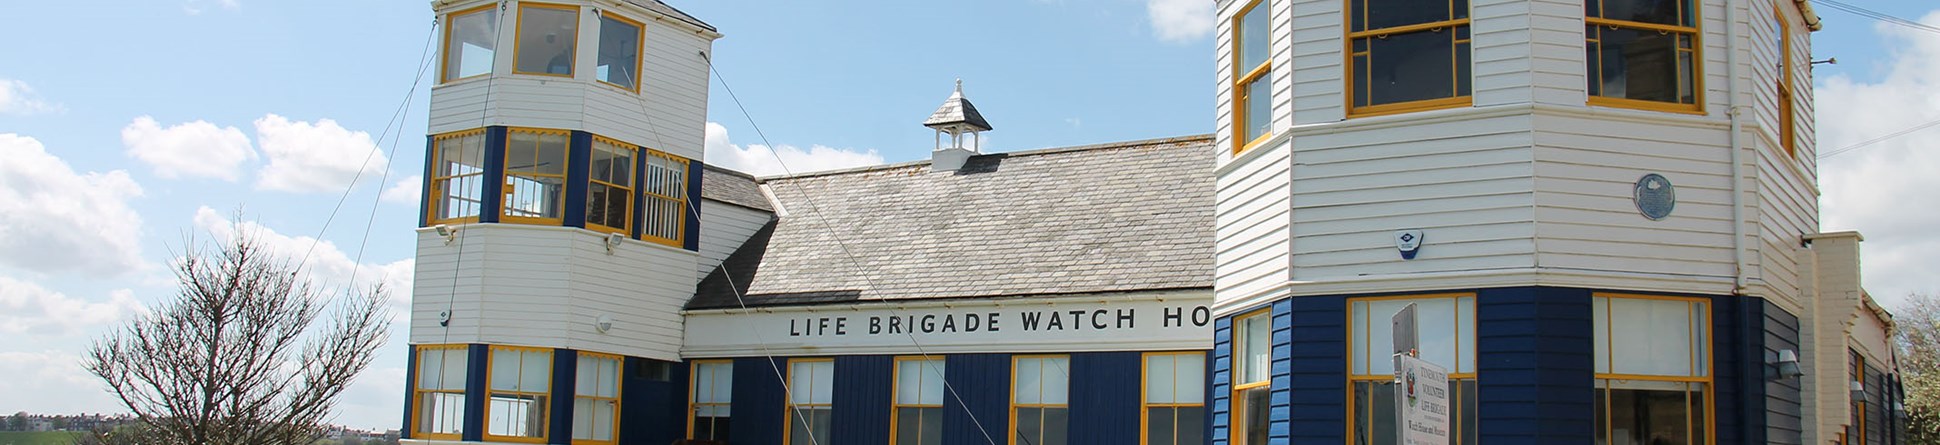 Photo of the outside of the Life Brigade Watch House - a white wooden building with blue and yellow painted windows.